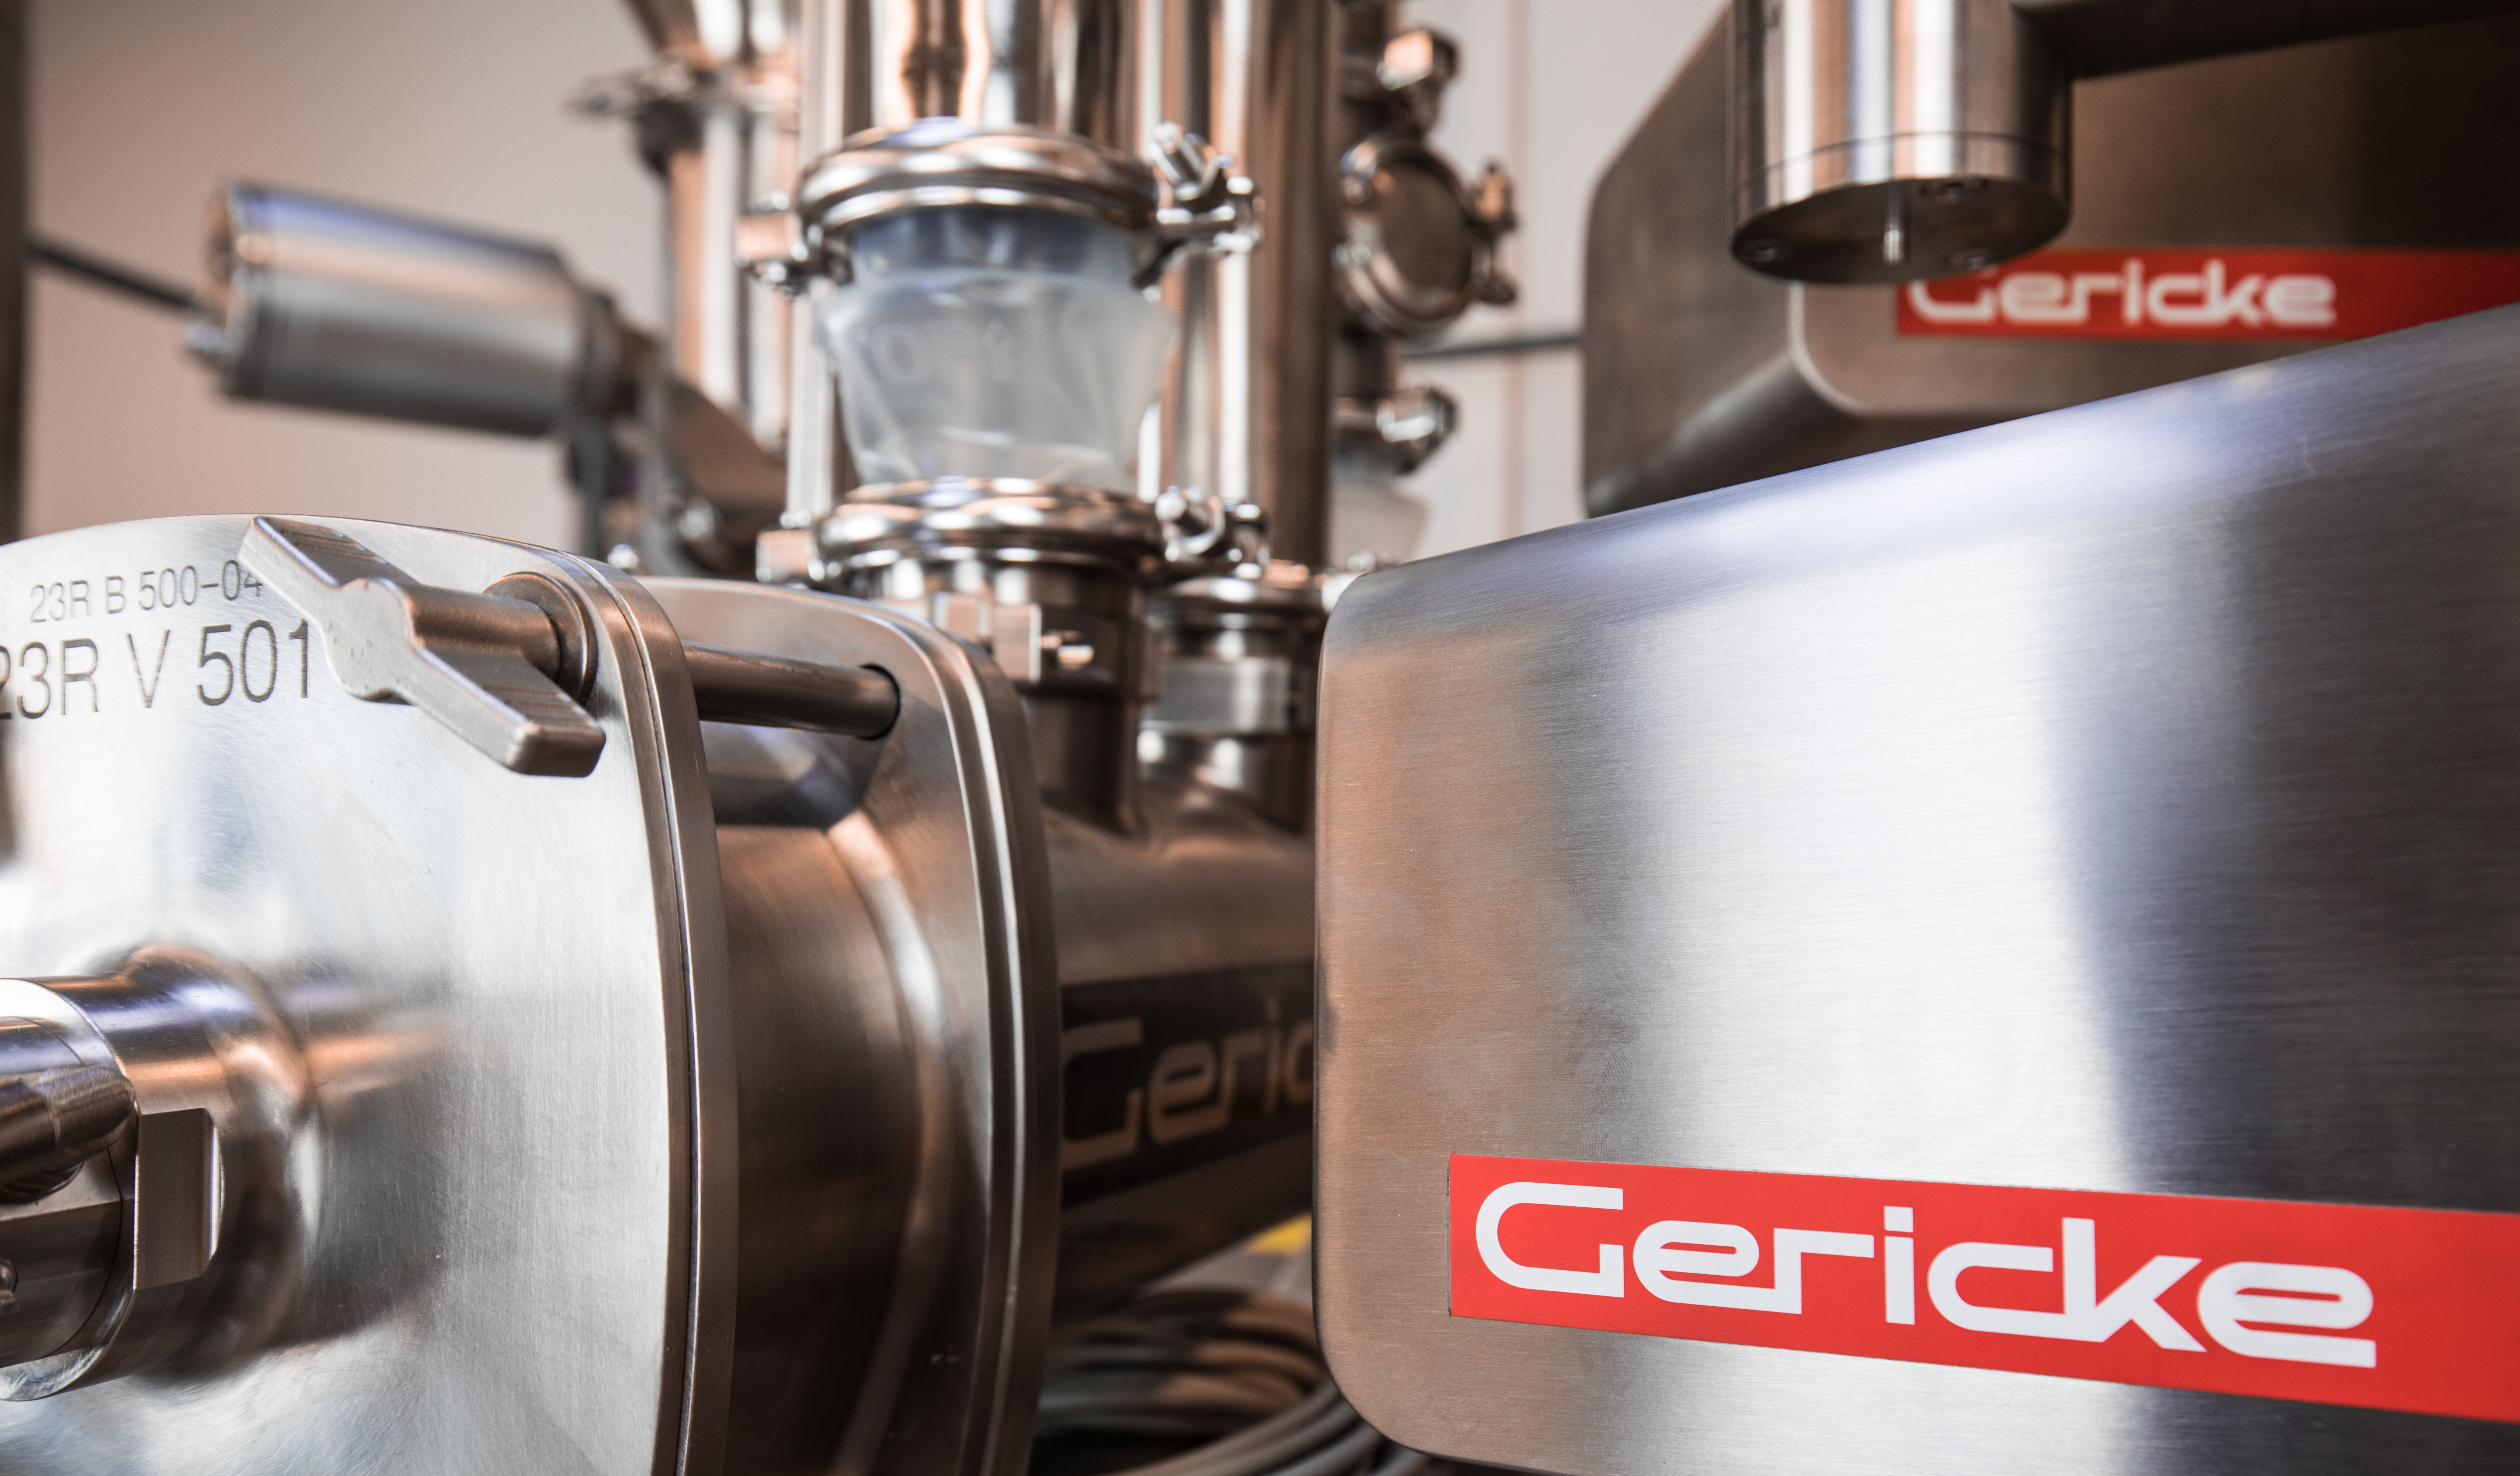 Gericke is one of the pioneers in the design of multi-component feeders.